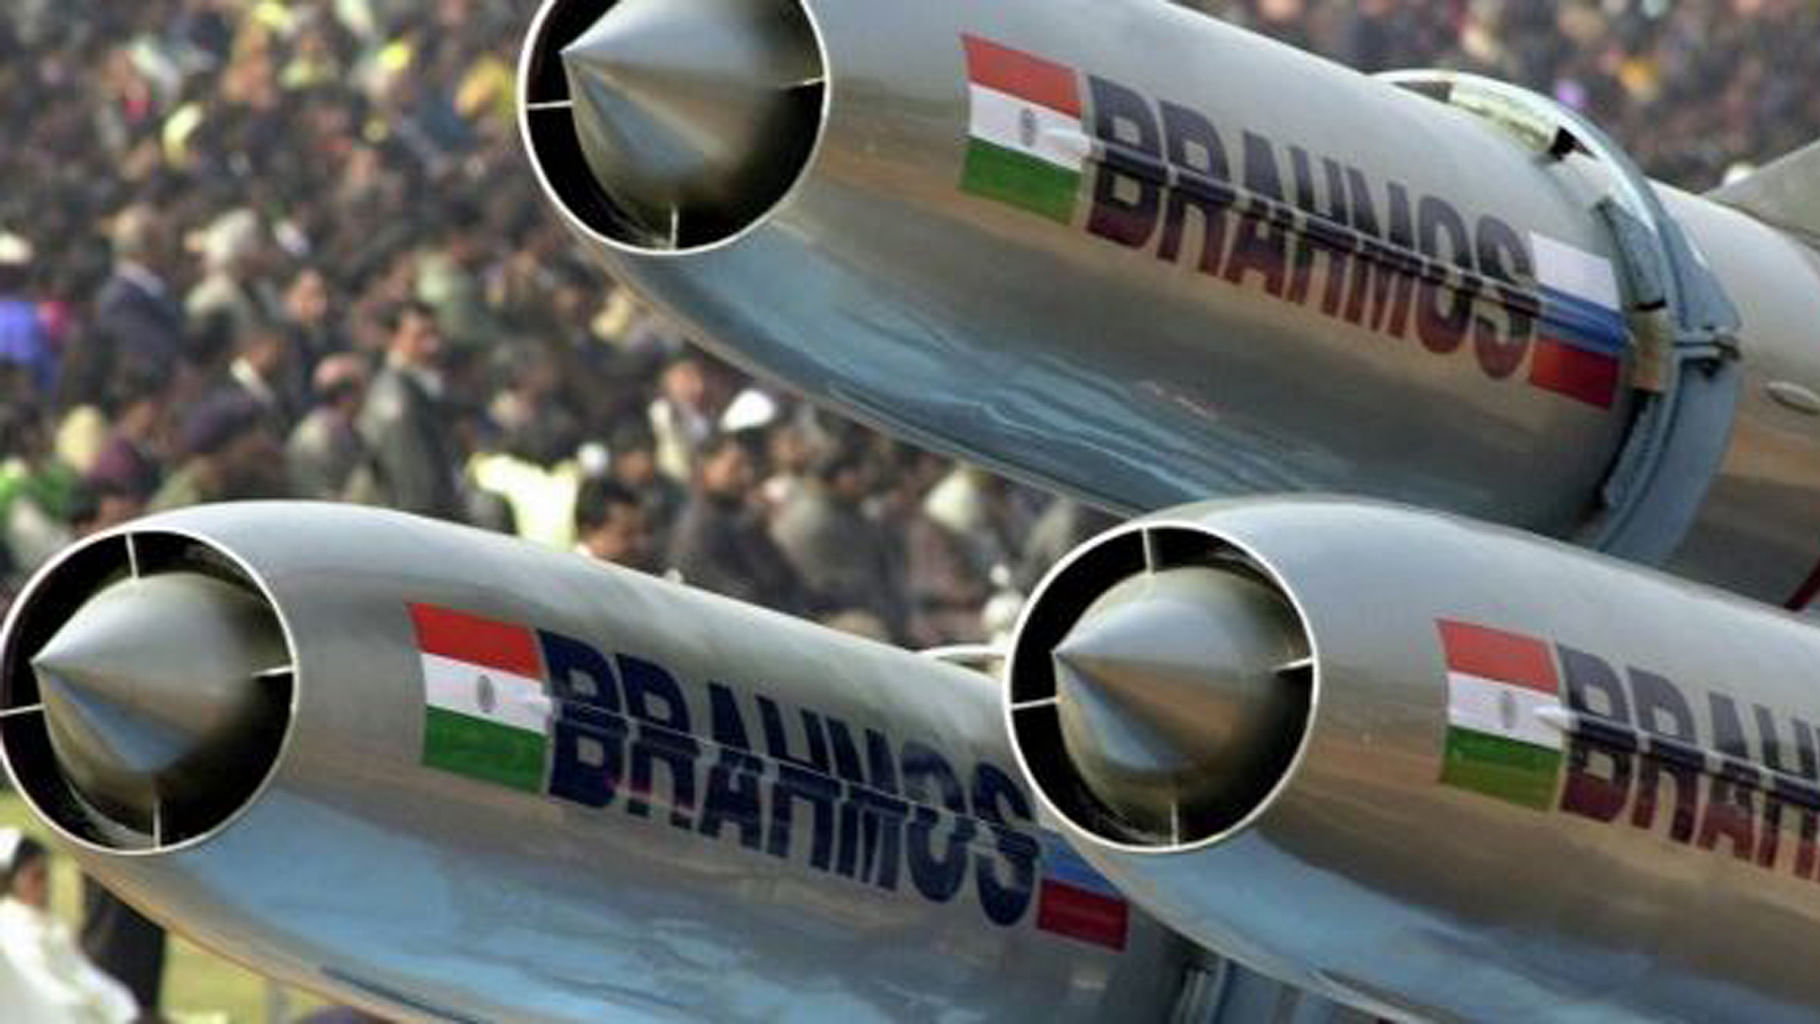 BrahMos is now capable of being launched from land, sea and air.